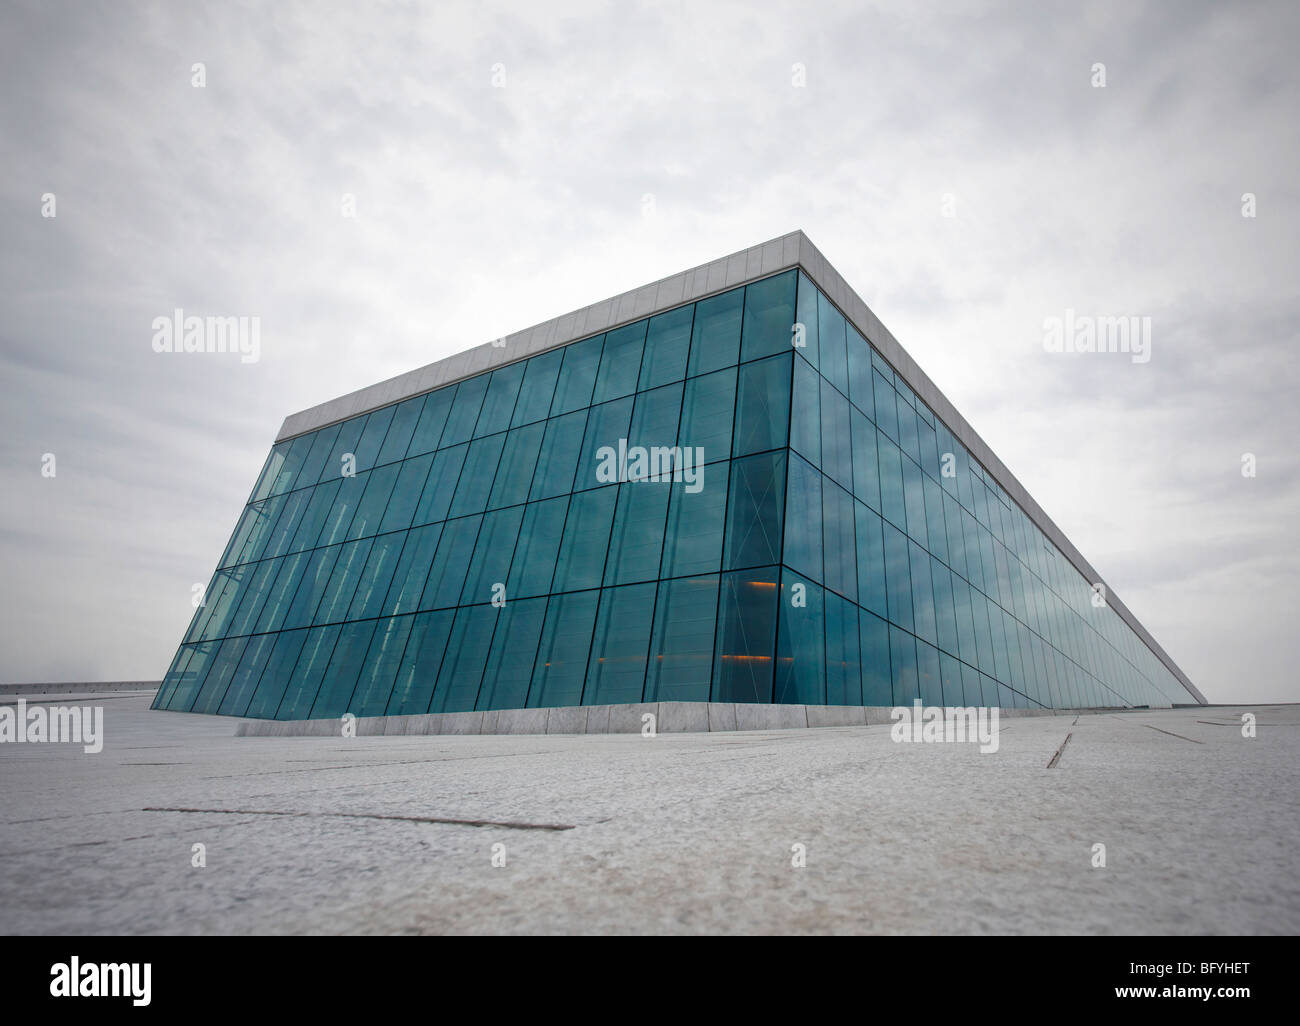 Oslo Opera House Banque D'Images